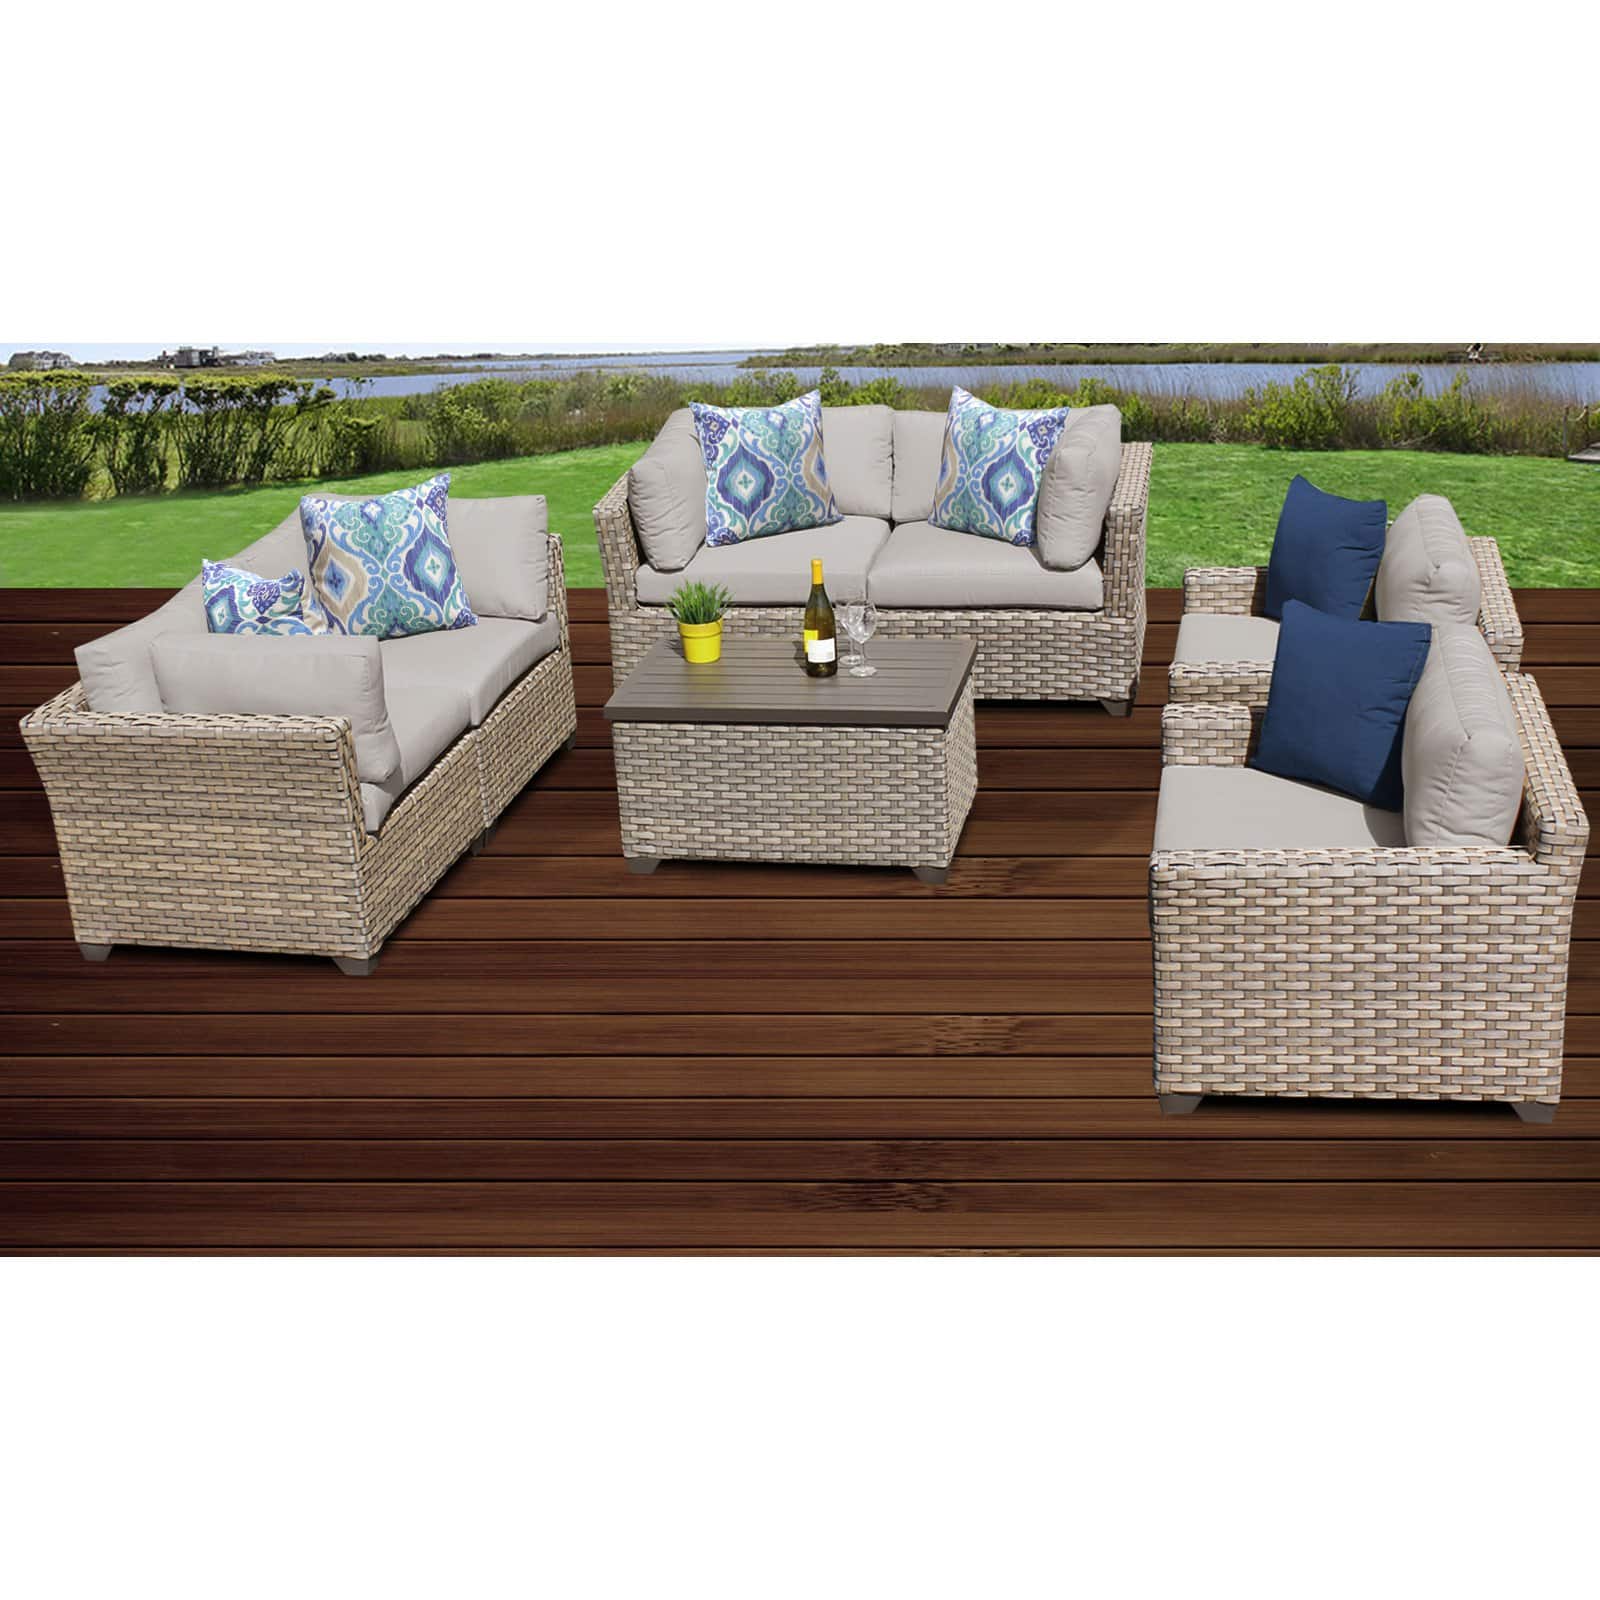 TK Classics Monterey Wicker 7 Piece Patio Conversation Set with Club Chair and 2 Sets of Cushion Covers - image 3 of 5